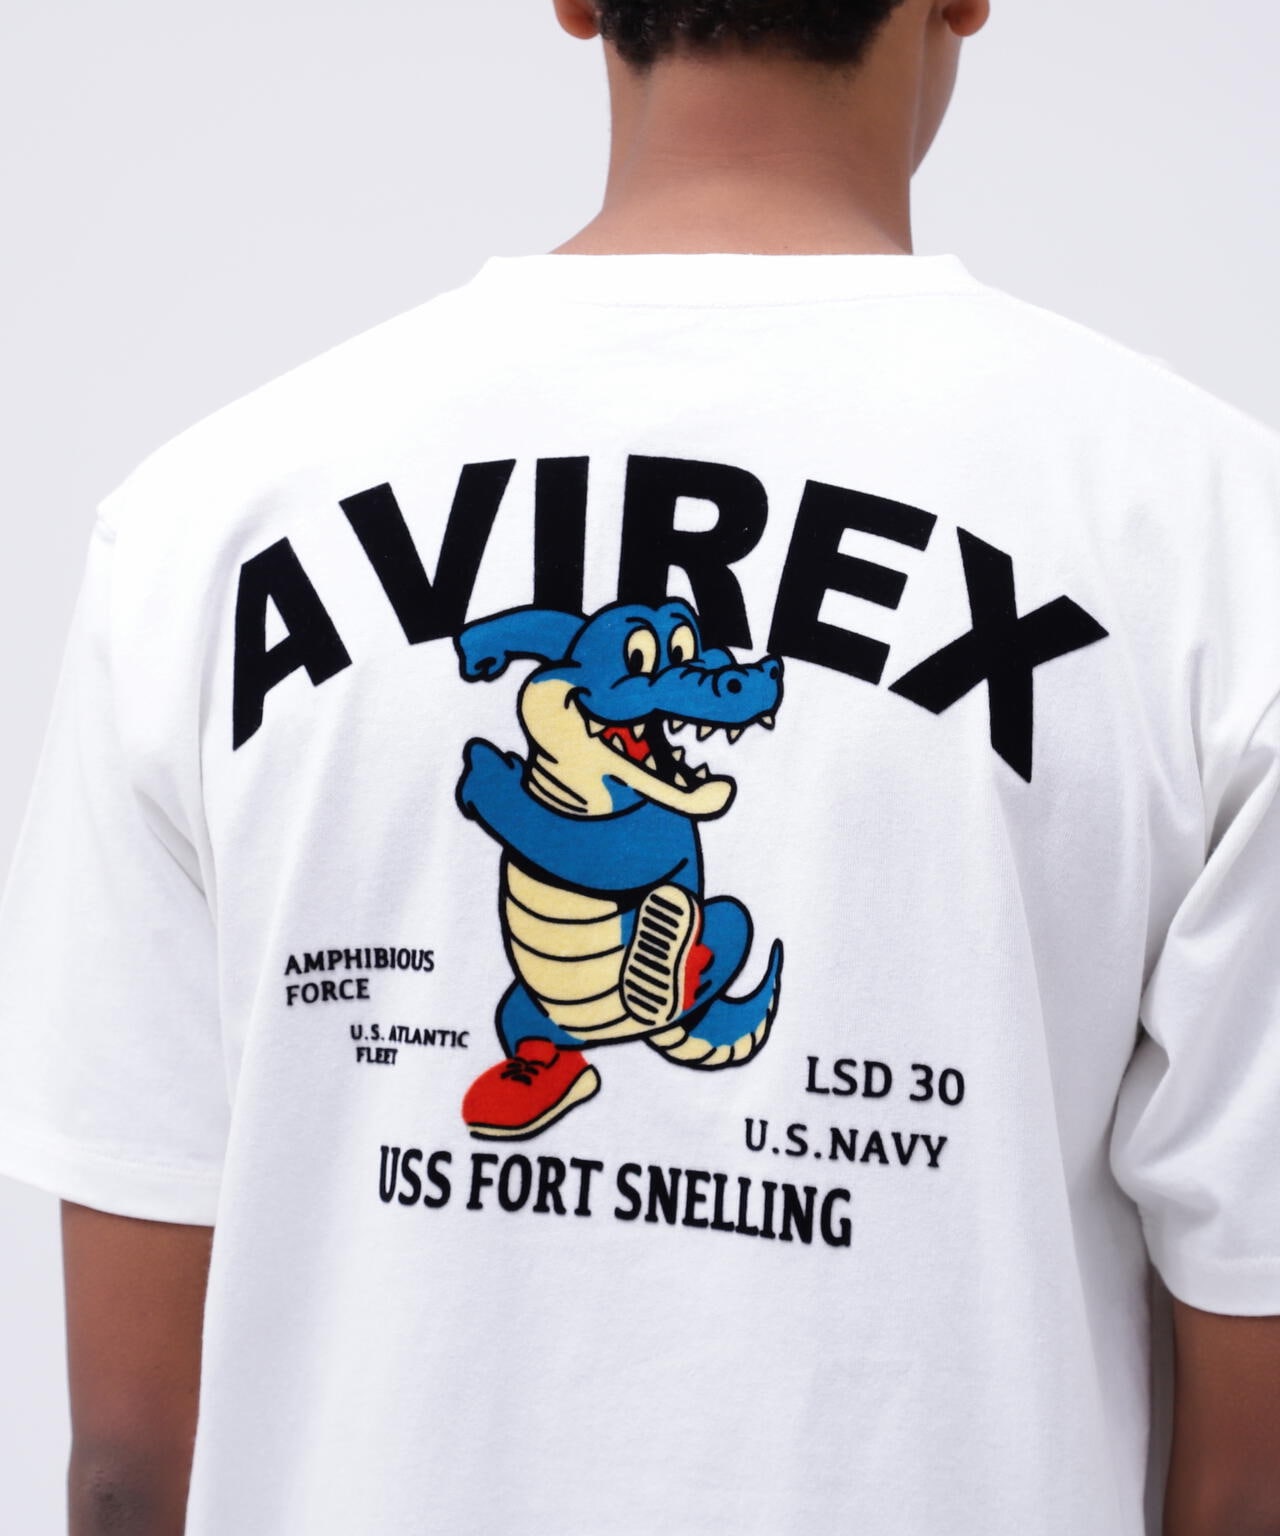 WEB&DEPOT限定》USS FORT SNELLING T-SHIRT / USS フォートスネリング ...